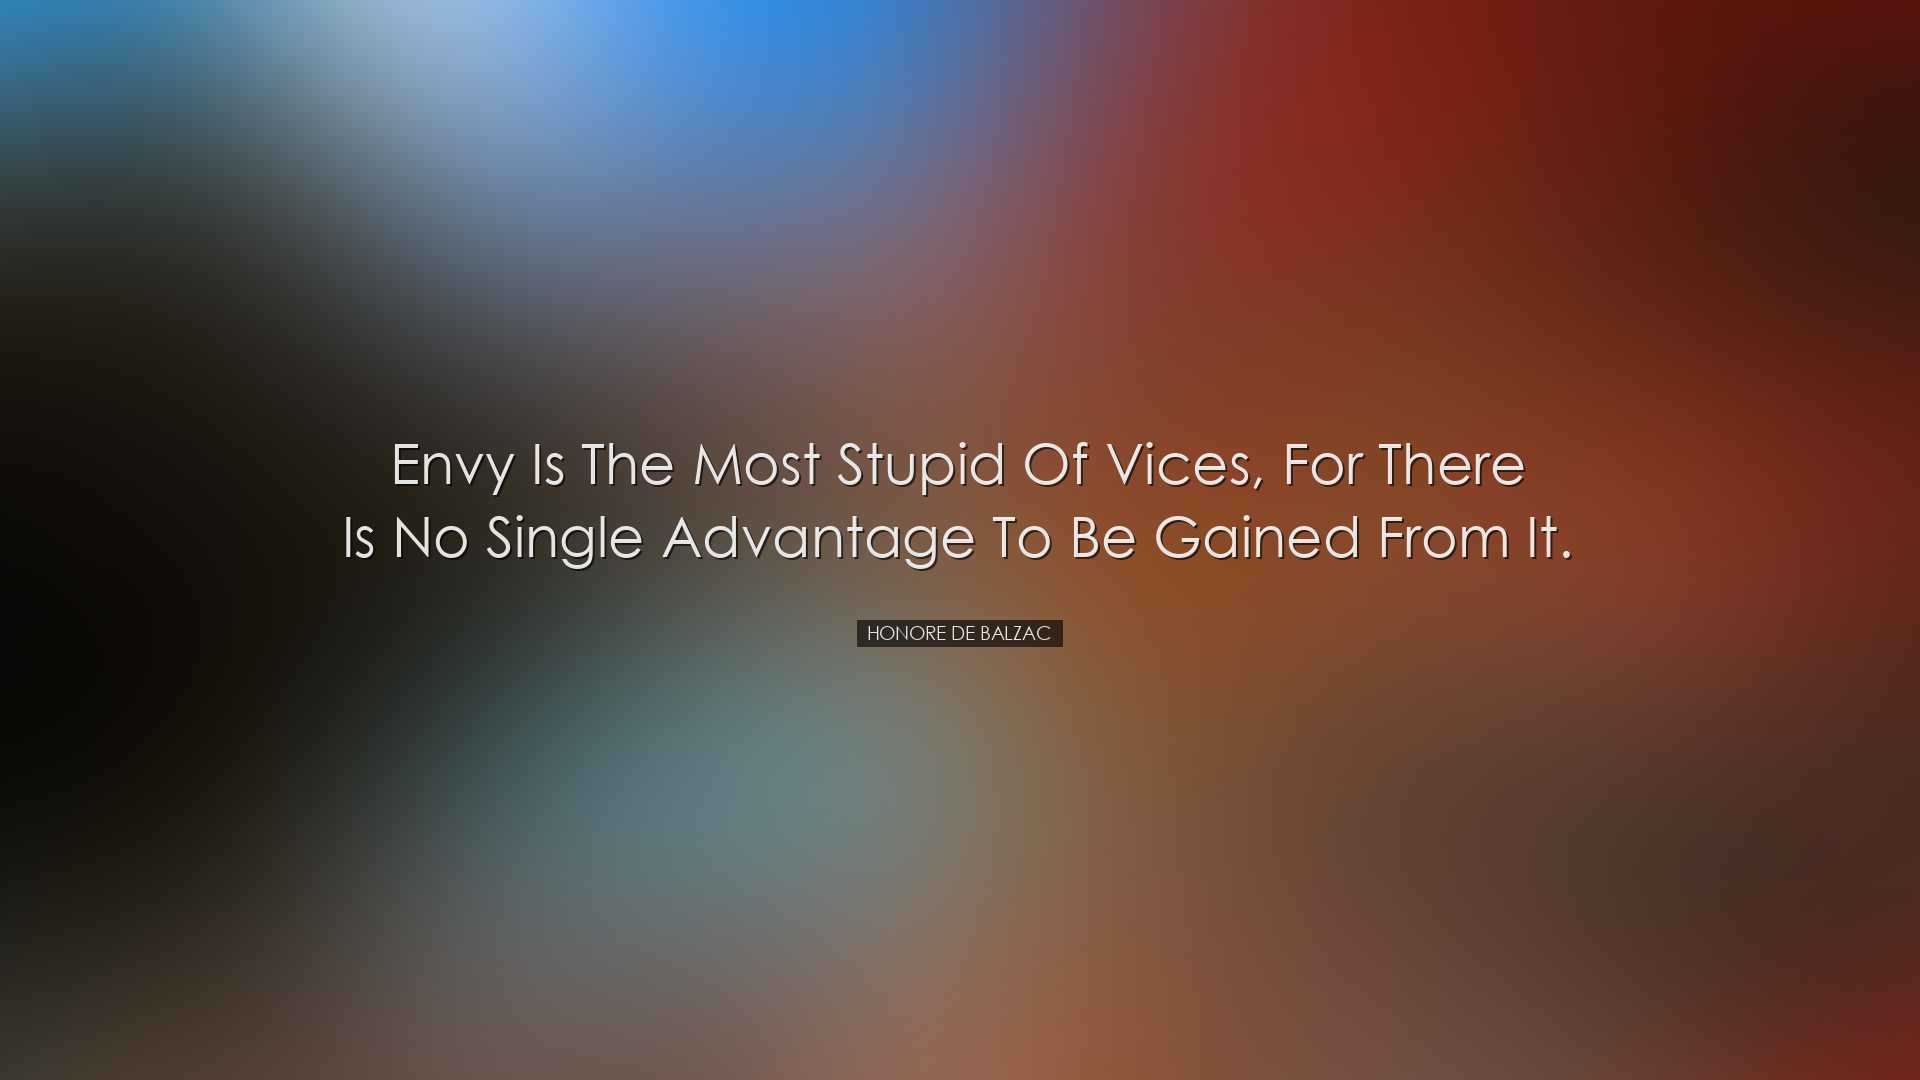 Envy is the most stupid of vices, for there is no single advantage